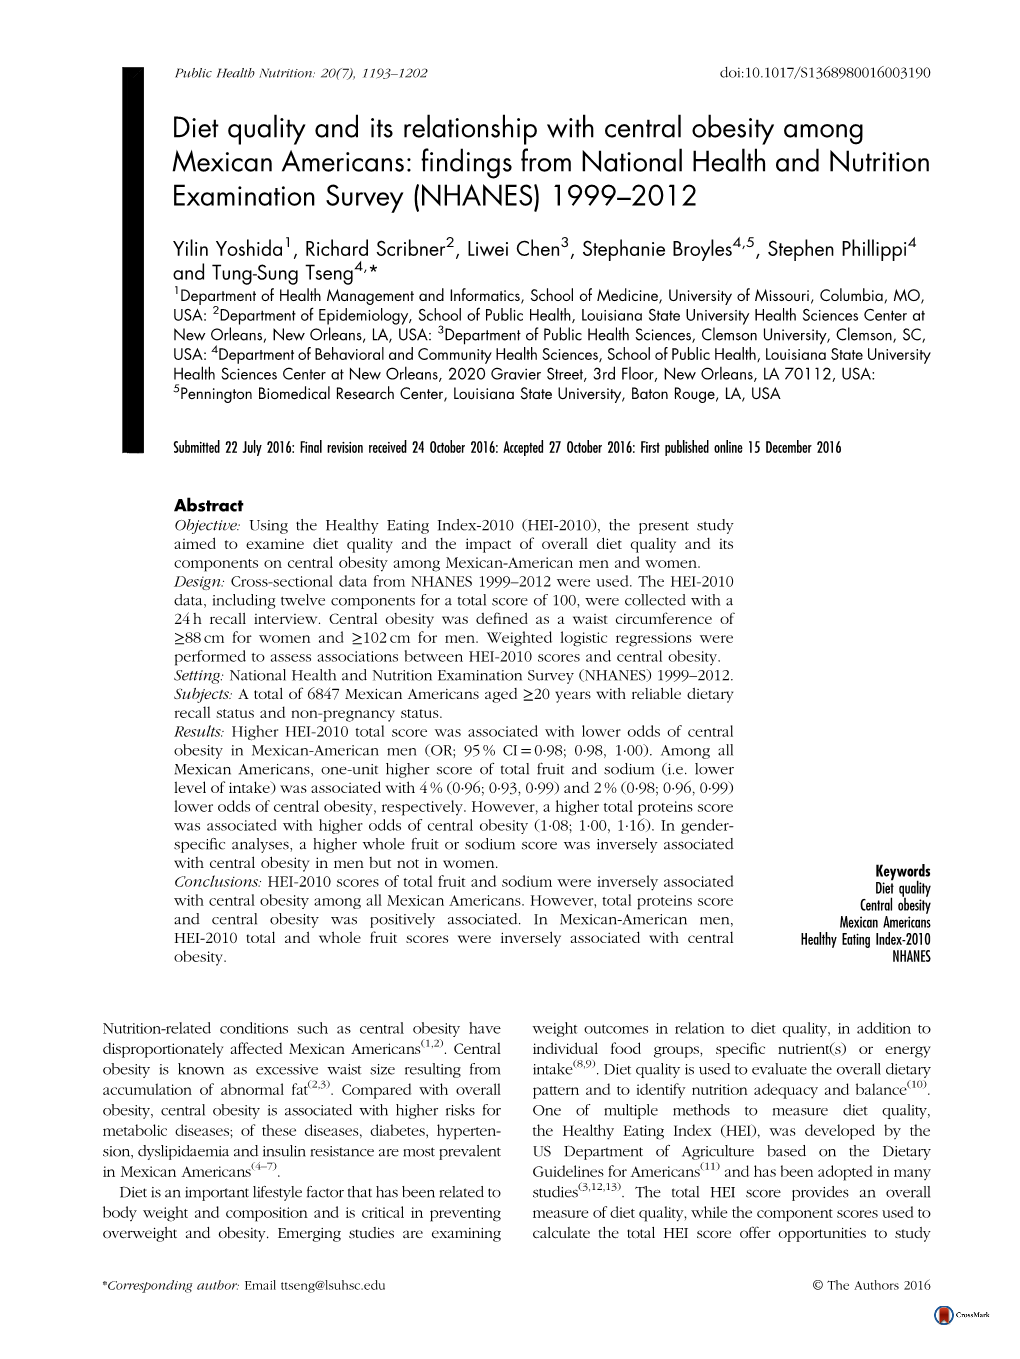 Diet Quality and Its Relationship with Central Obesity Among Mexican Americans: ﬁndings from National Health and Nutrition Examination Survey (NHANES) 1999–2012